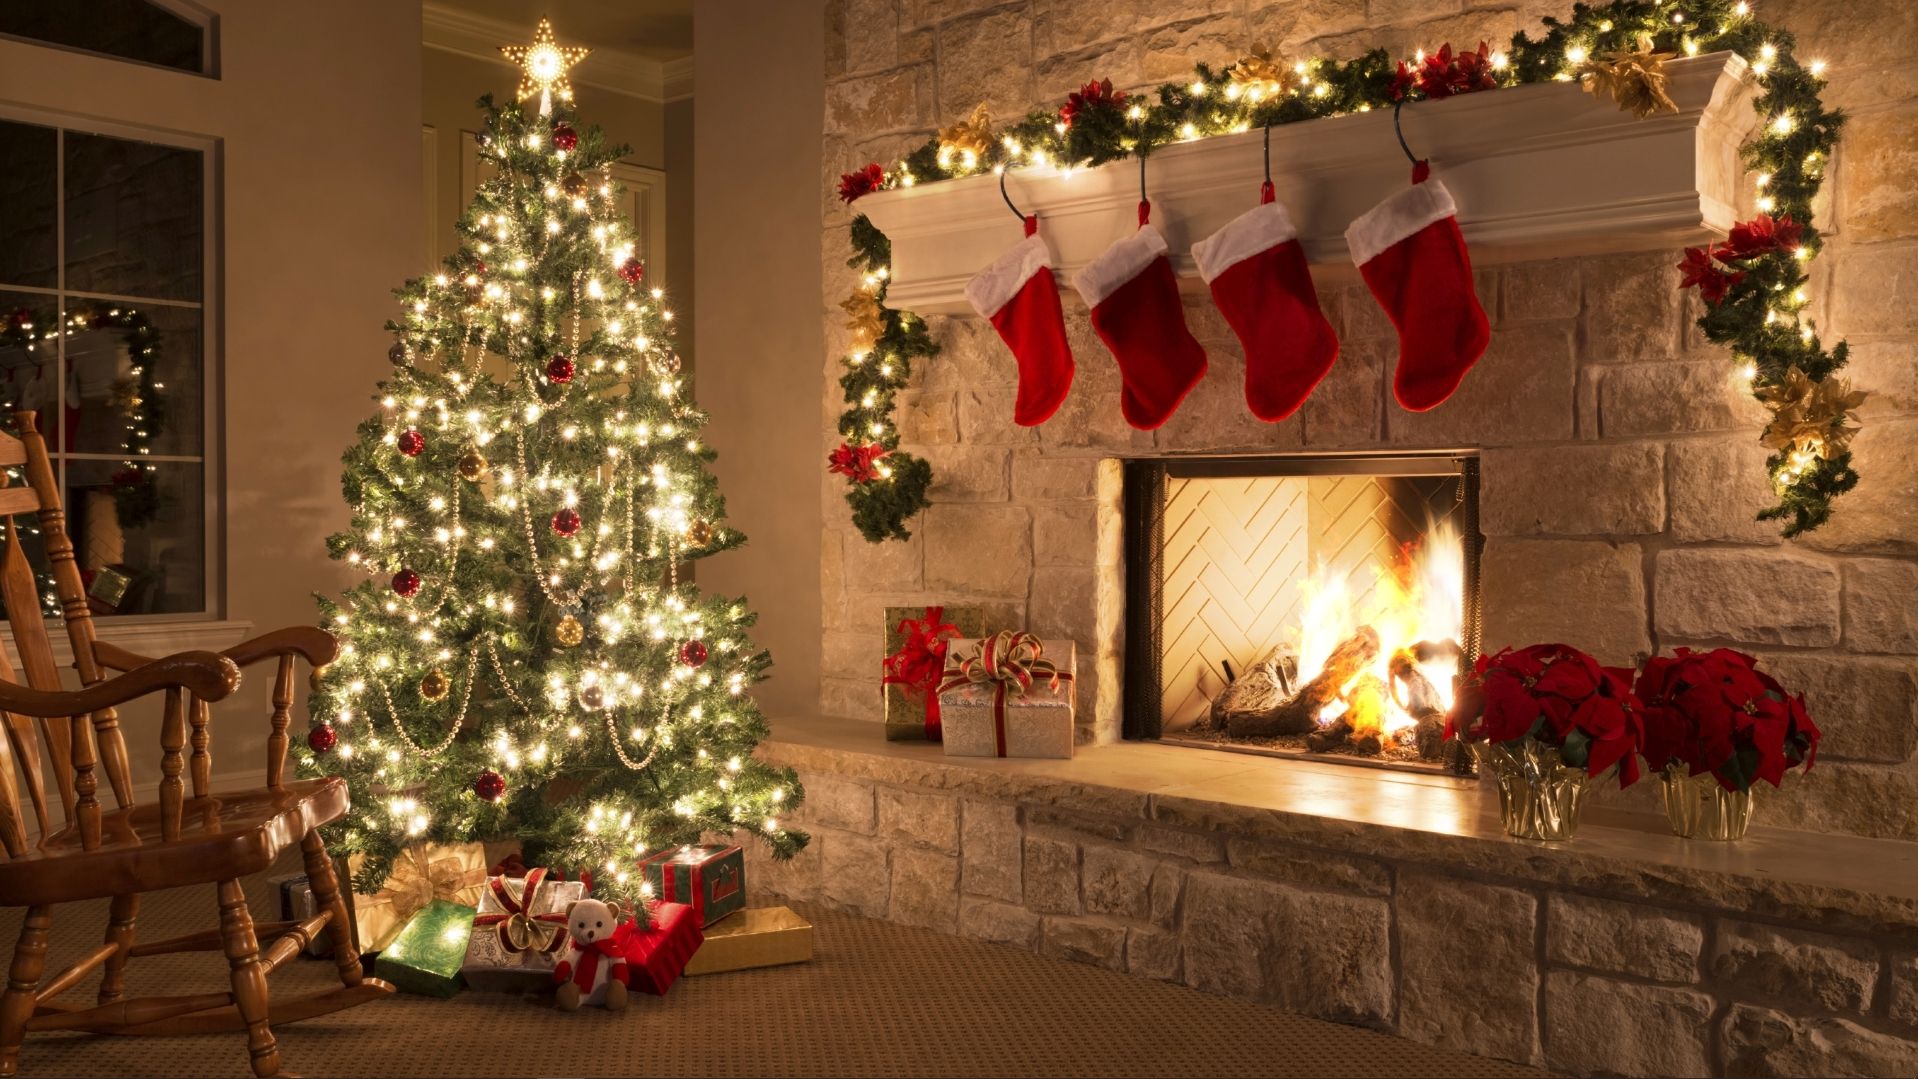 Christmas fireplace in a cozy room live wallpaper [DOWNLOAD FREE]